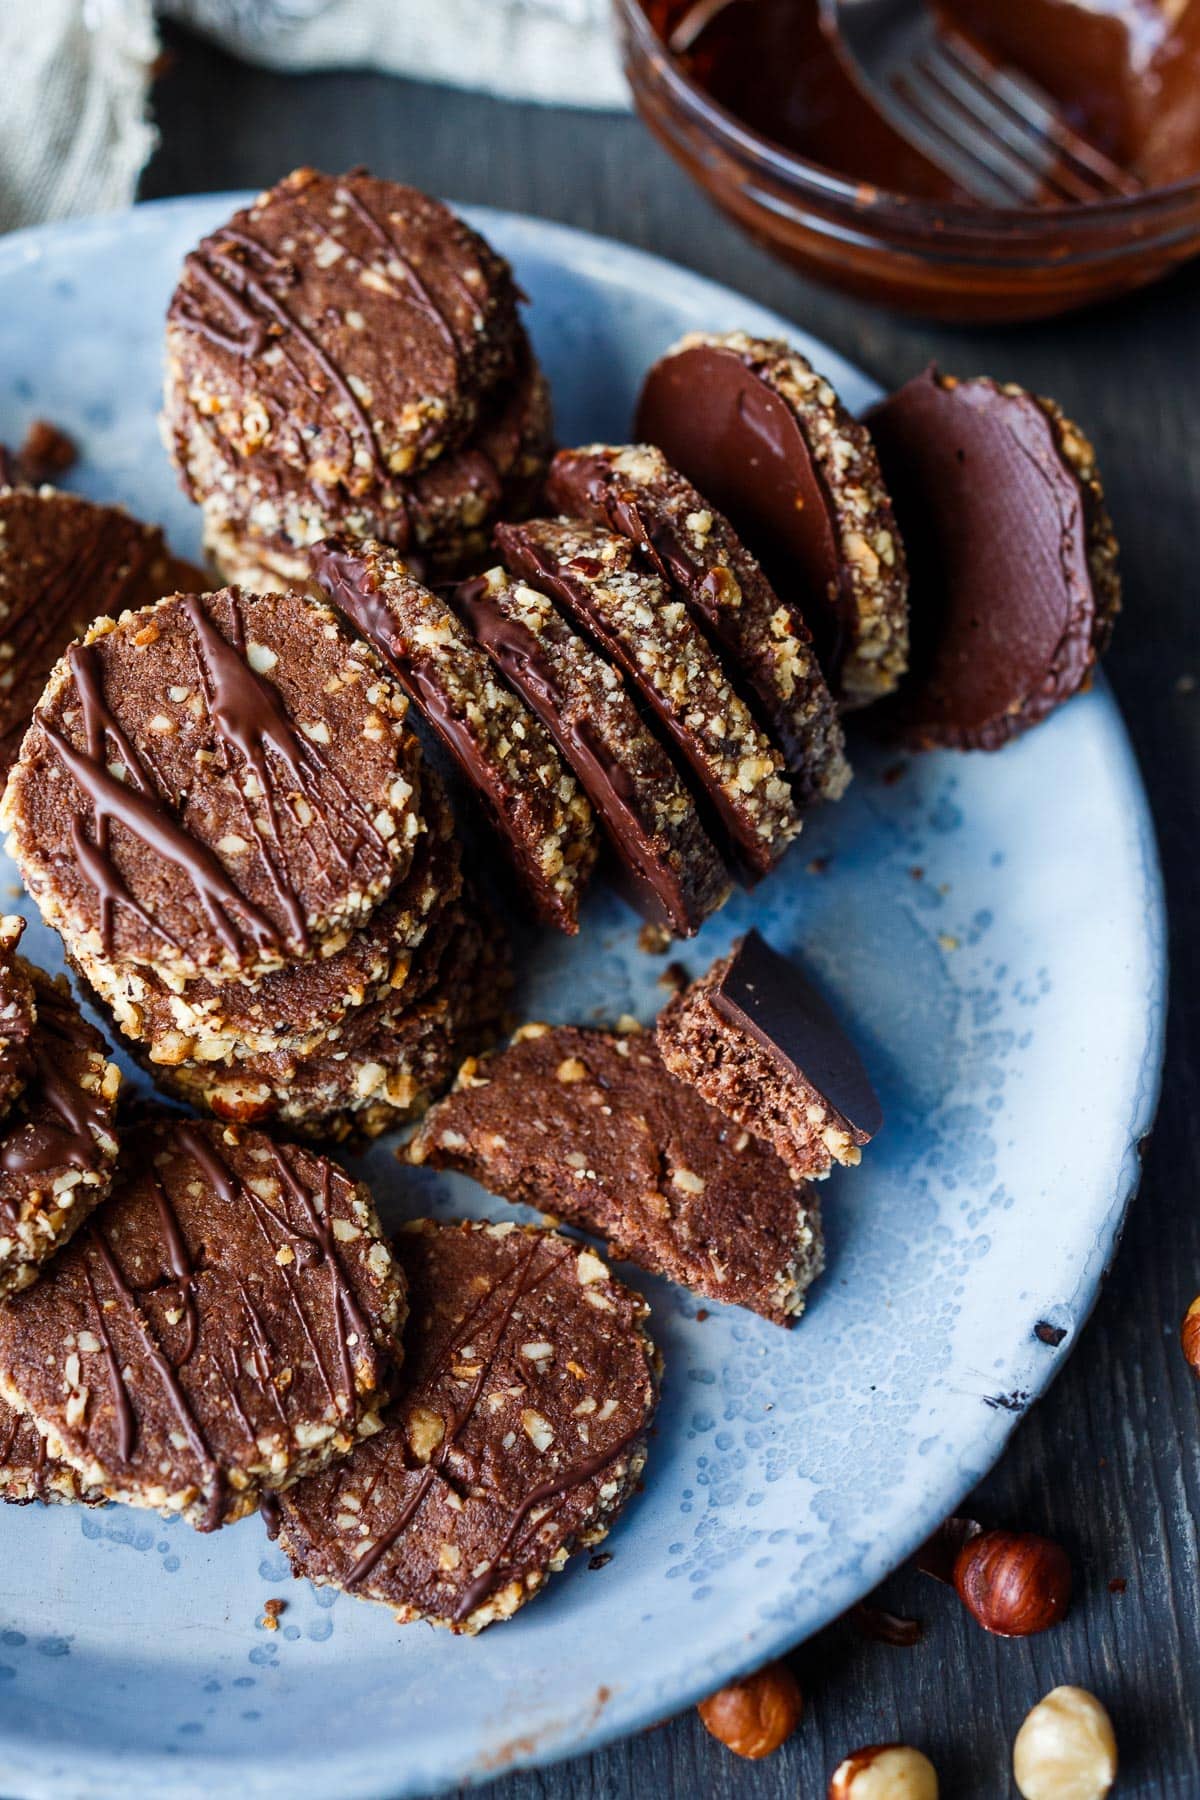 Richly flavored with melt-in-your-mouth yumminess, these Chocolate Hazelnut Shortbread Cookies have the perfect buttery crunch. Relish them as is or take them over the top with chocolate drizzle or chocolate dipped.